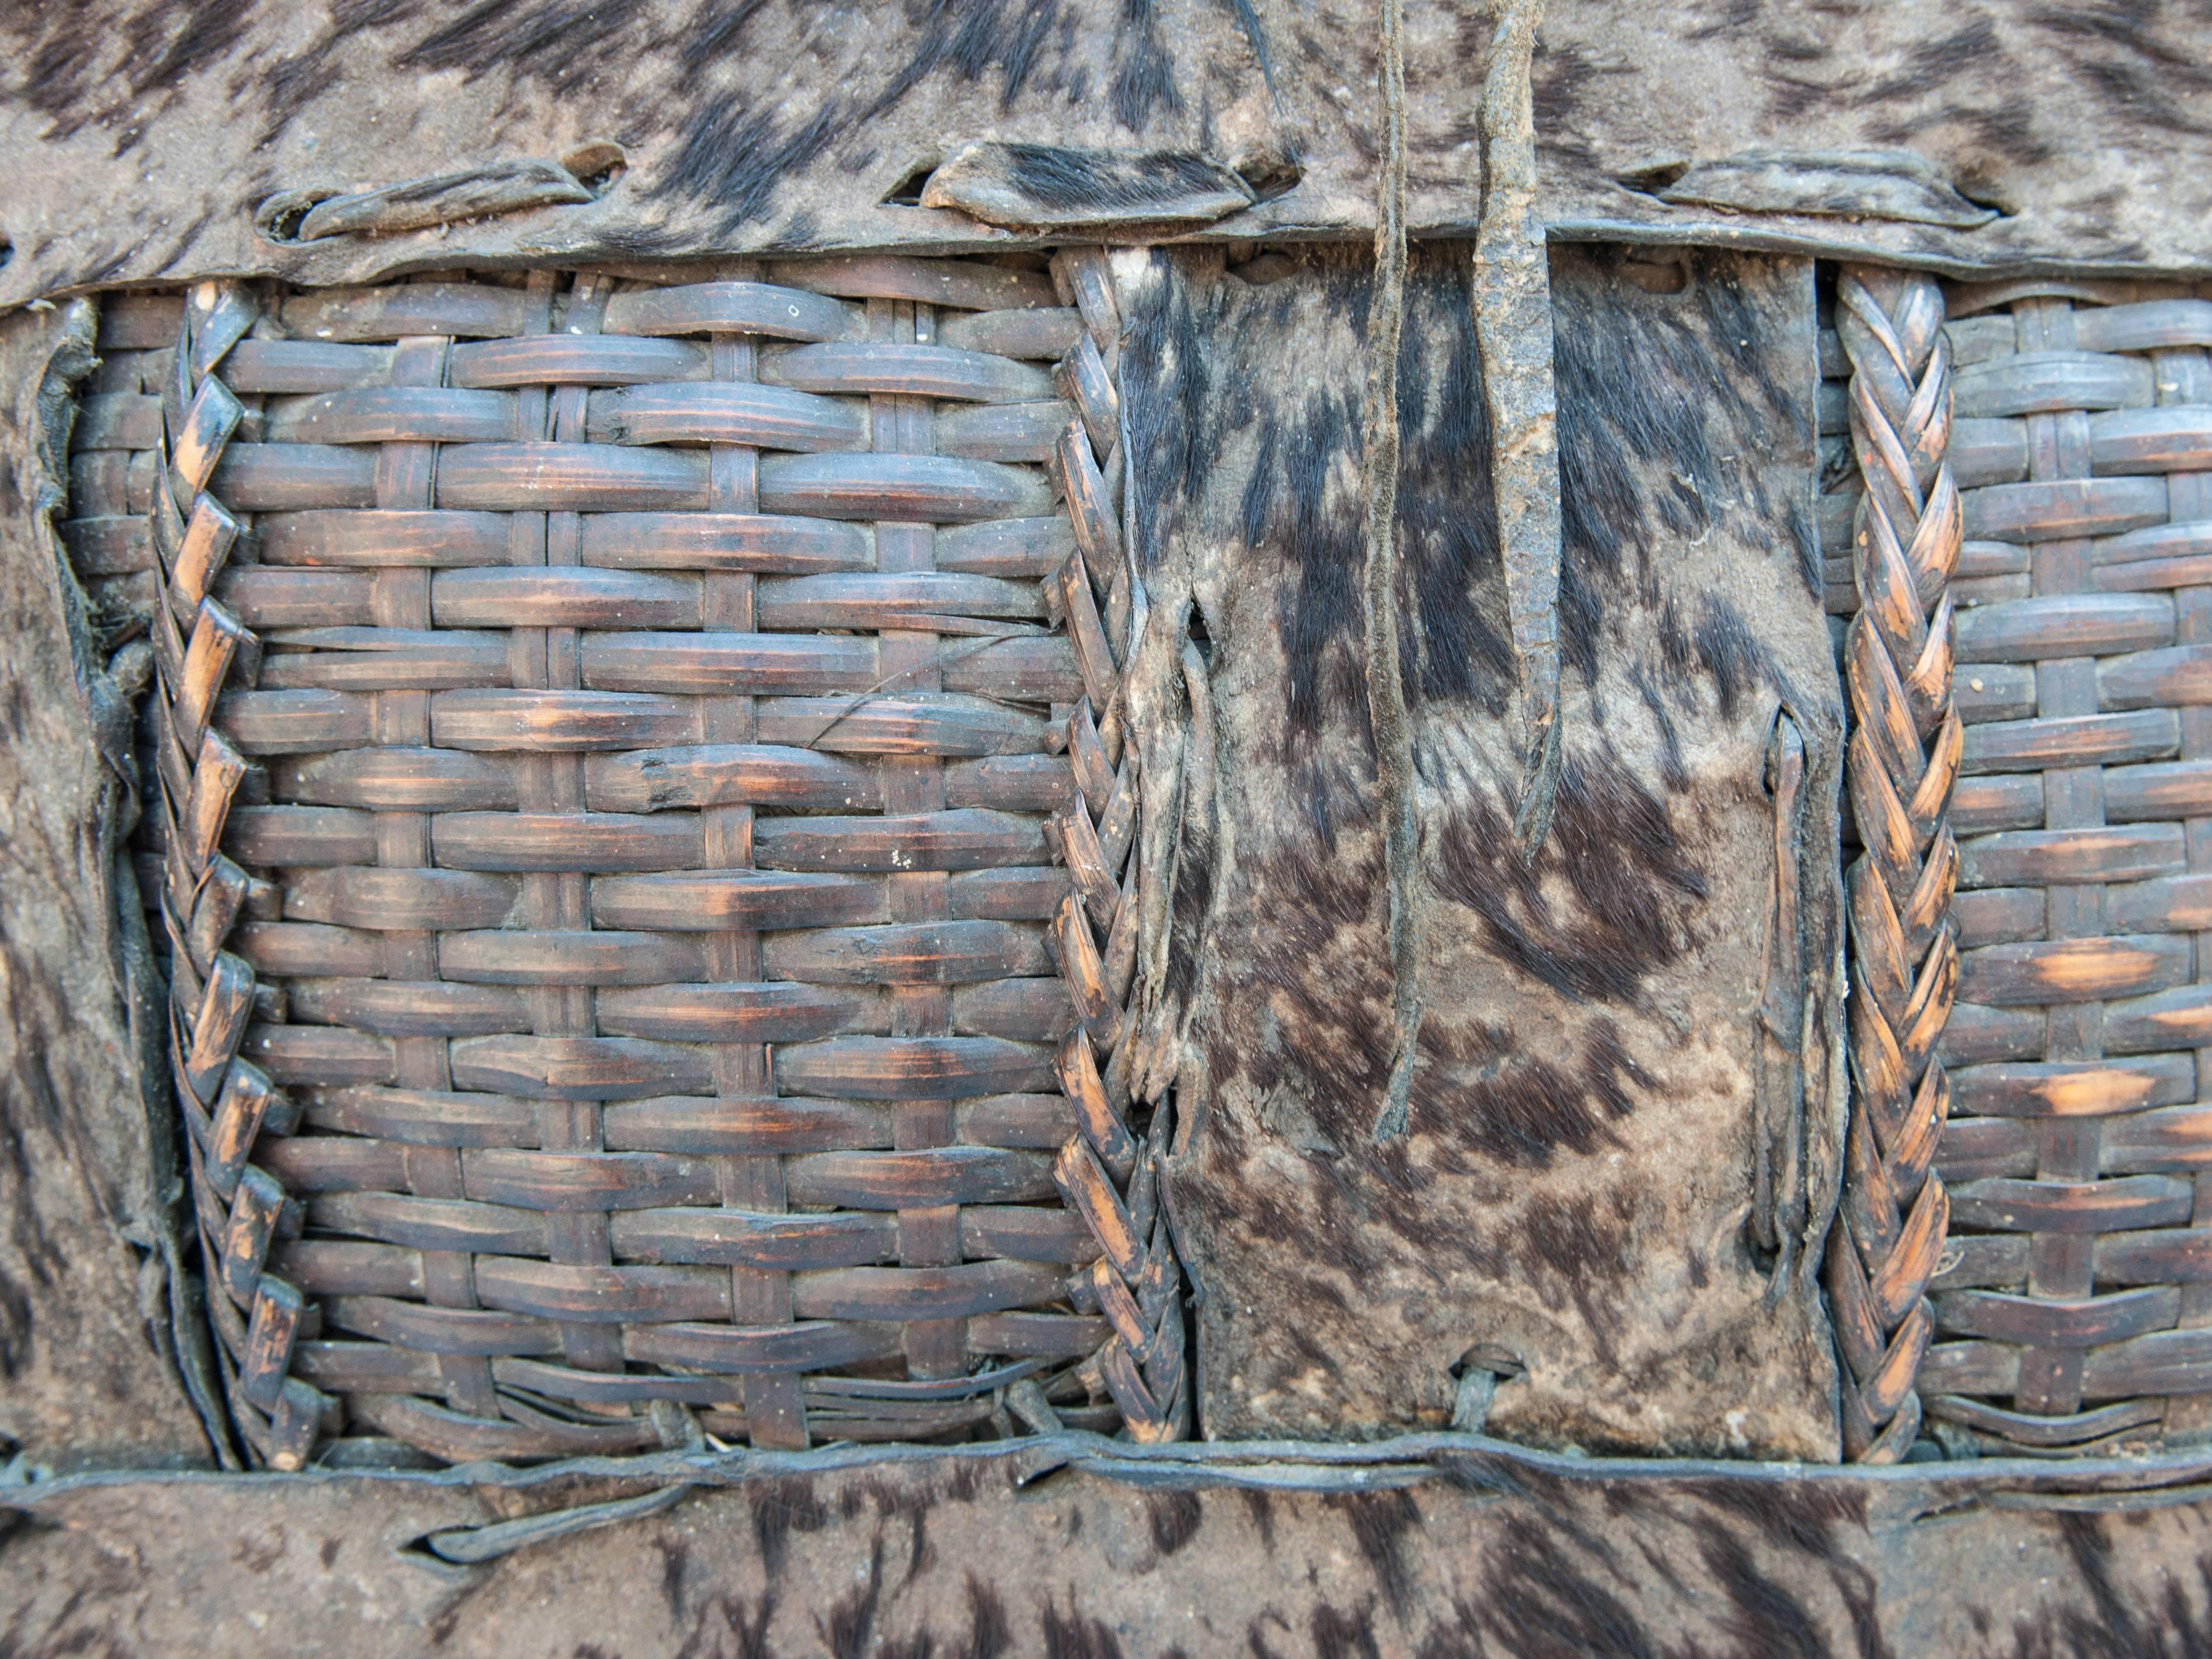 bamboo basket with lid